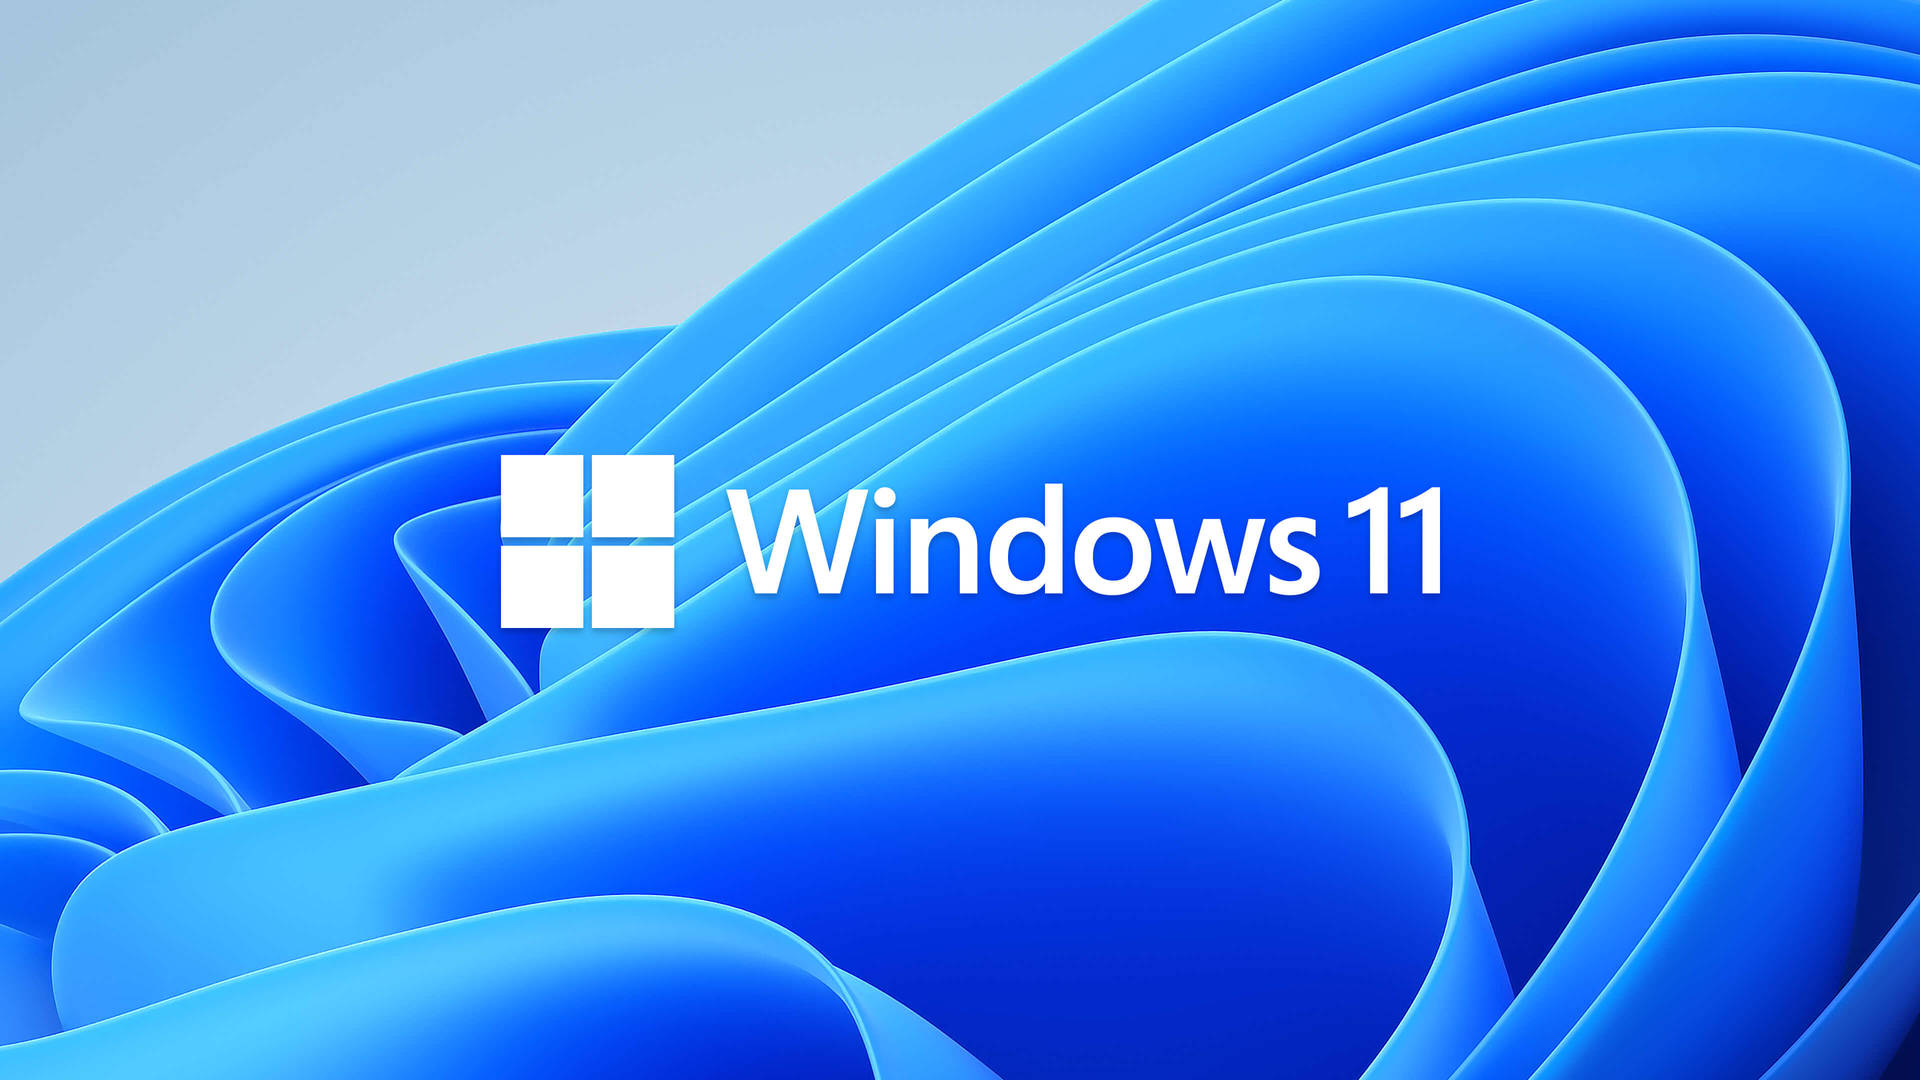 200+] Windows 11 Wallpapers For Free | Wallpapers.Com